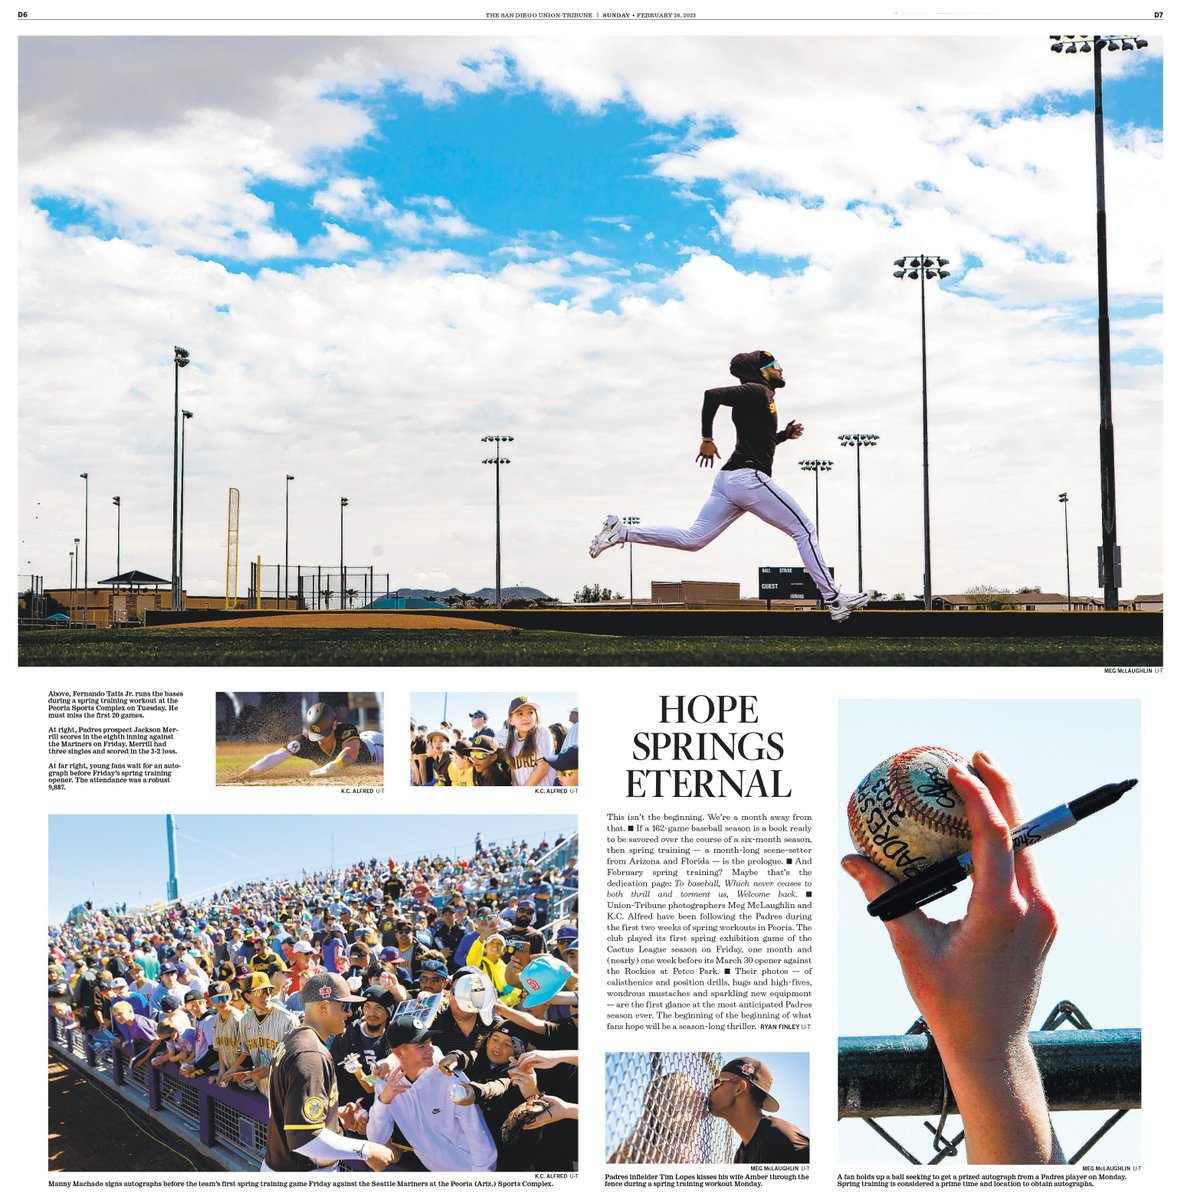 In Sunday's Union-Tribune print: Padres Spring Training photo spread with images from staff photographers @KCAlfredPhoto and @MegMcLaughlinDA. #PadresST  @APSE_sportmedia